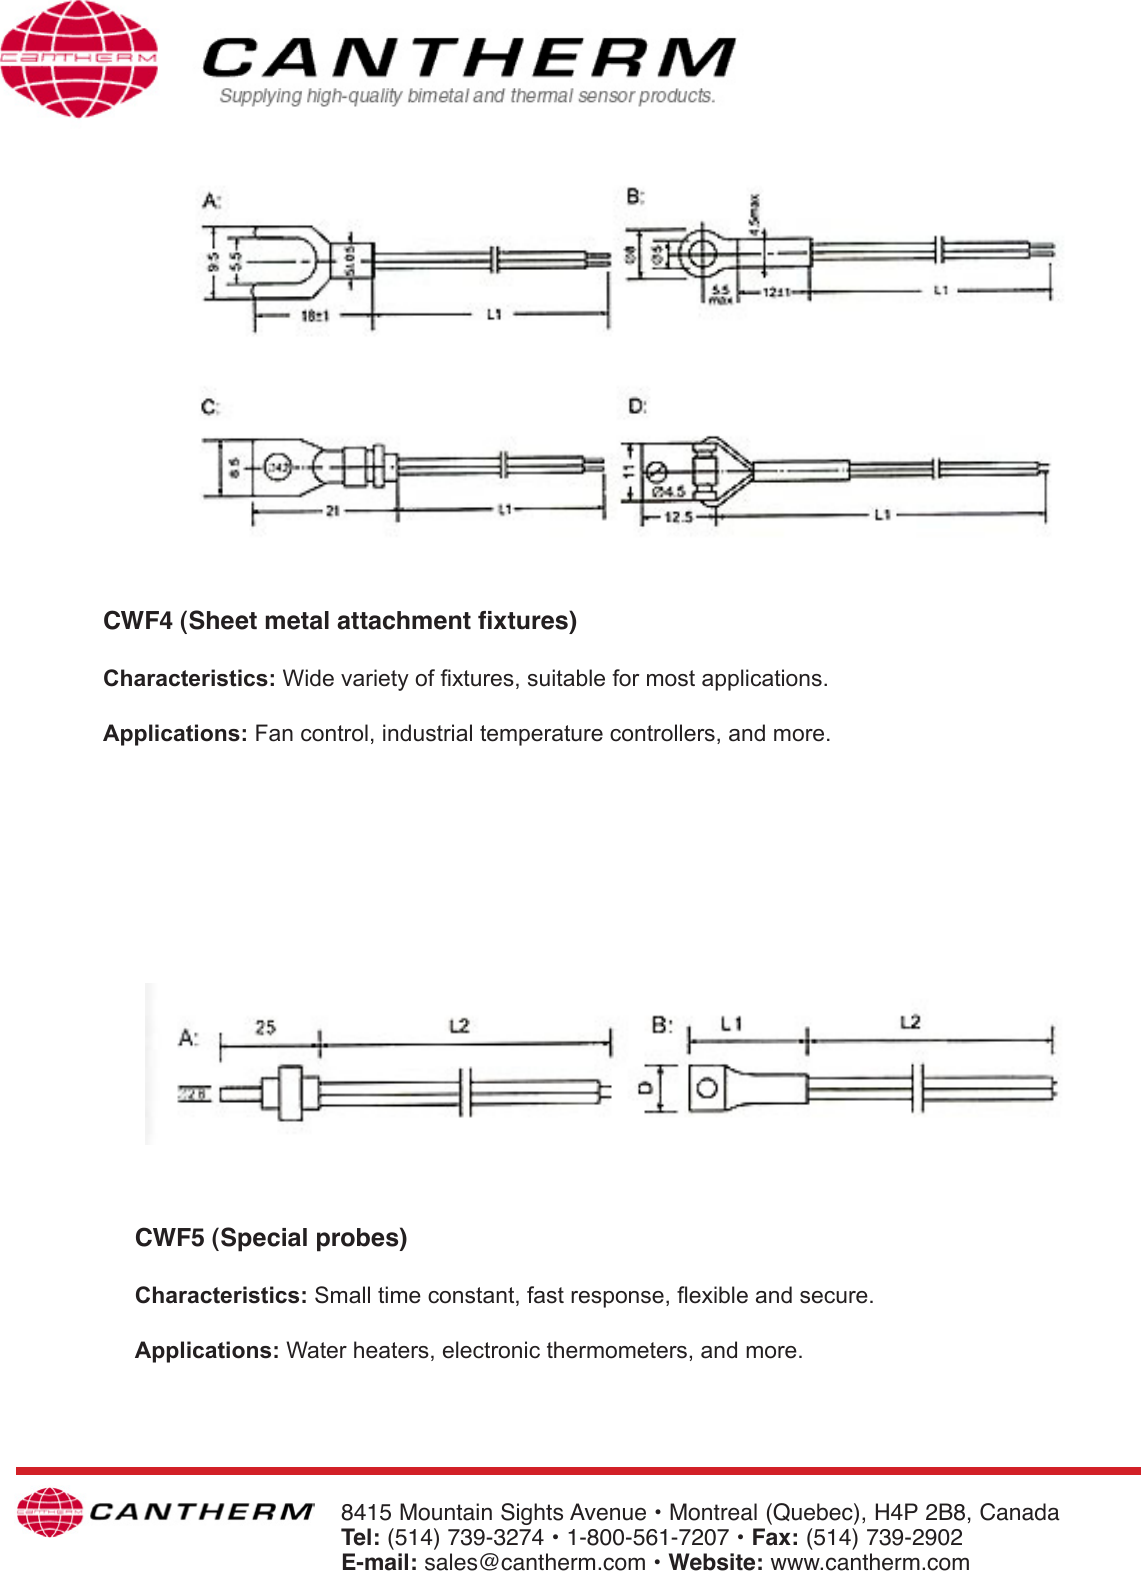 Page 4 of 5 - Controlanything 317-1382 Cwf User Manual